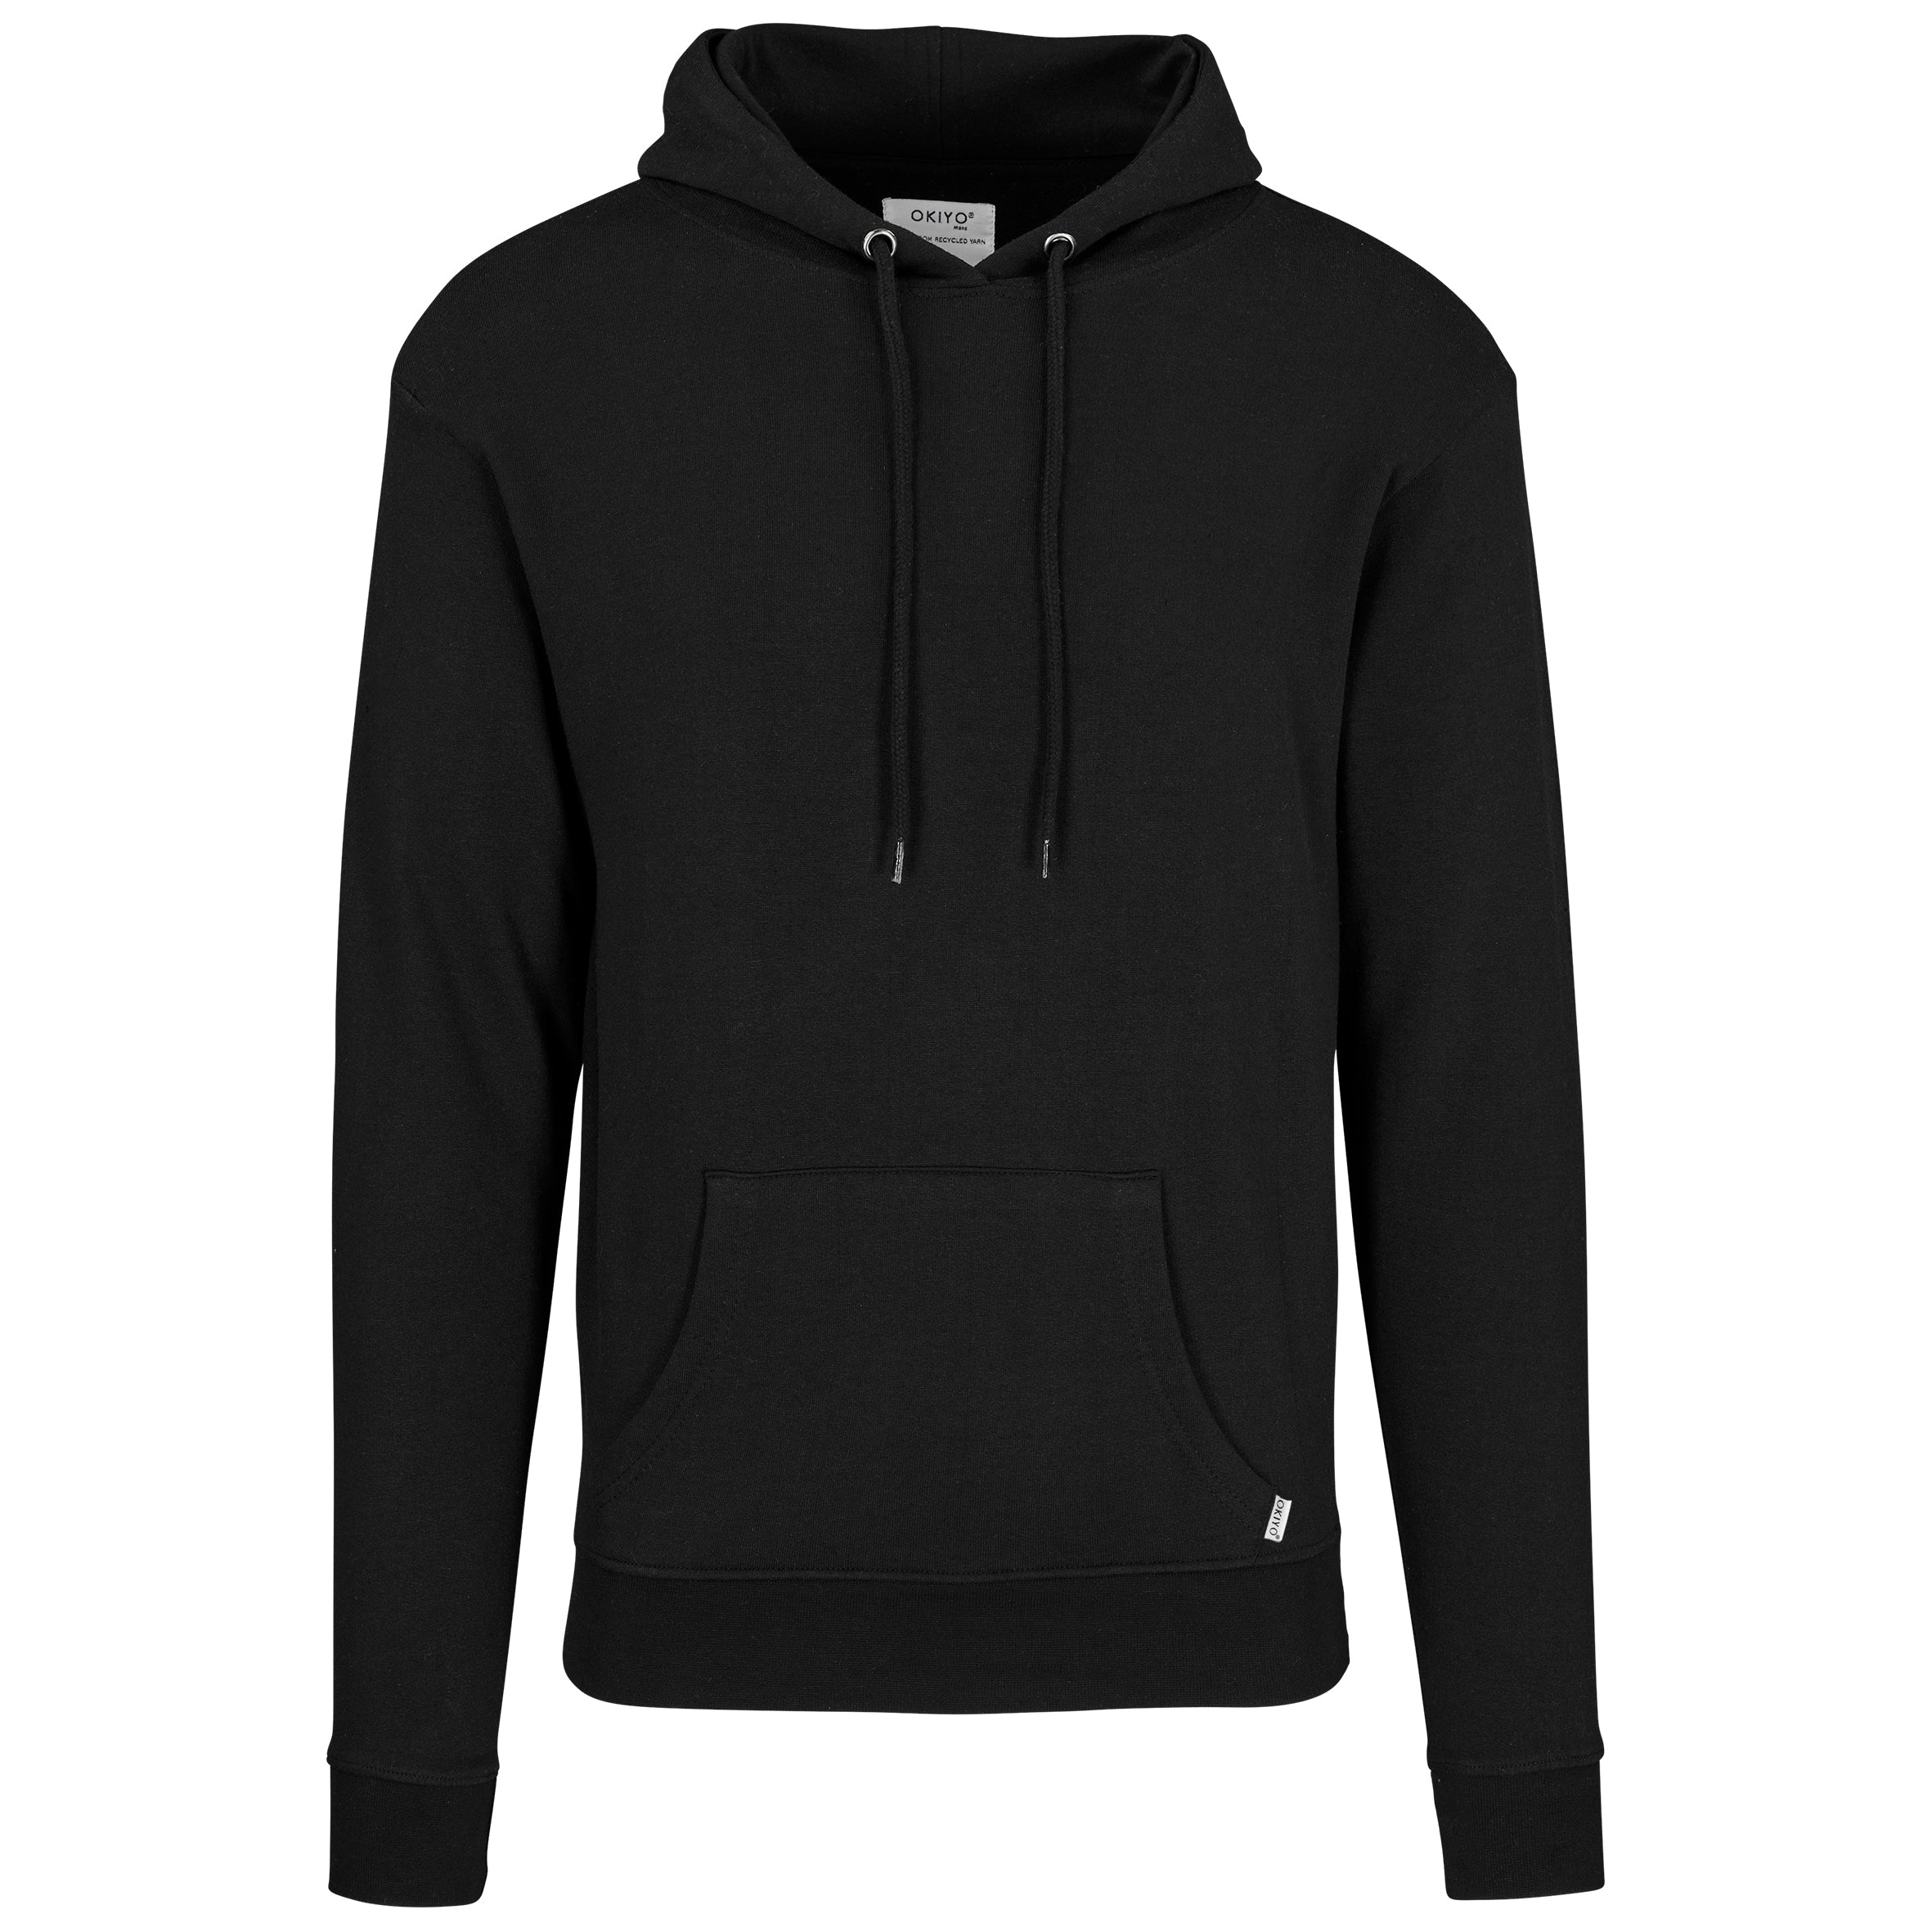 Mens Recycled Hooded Sweater L / Black / BL